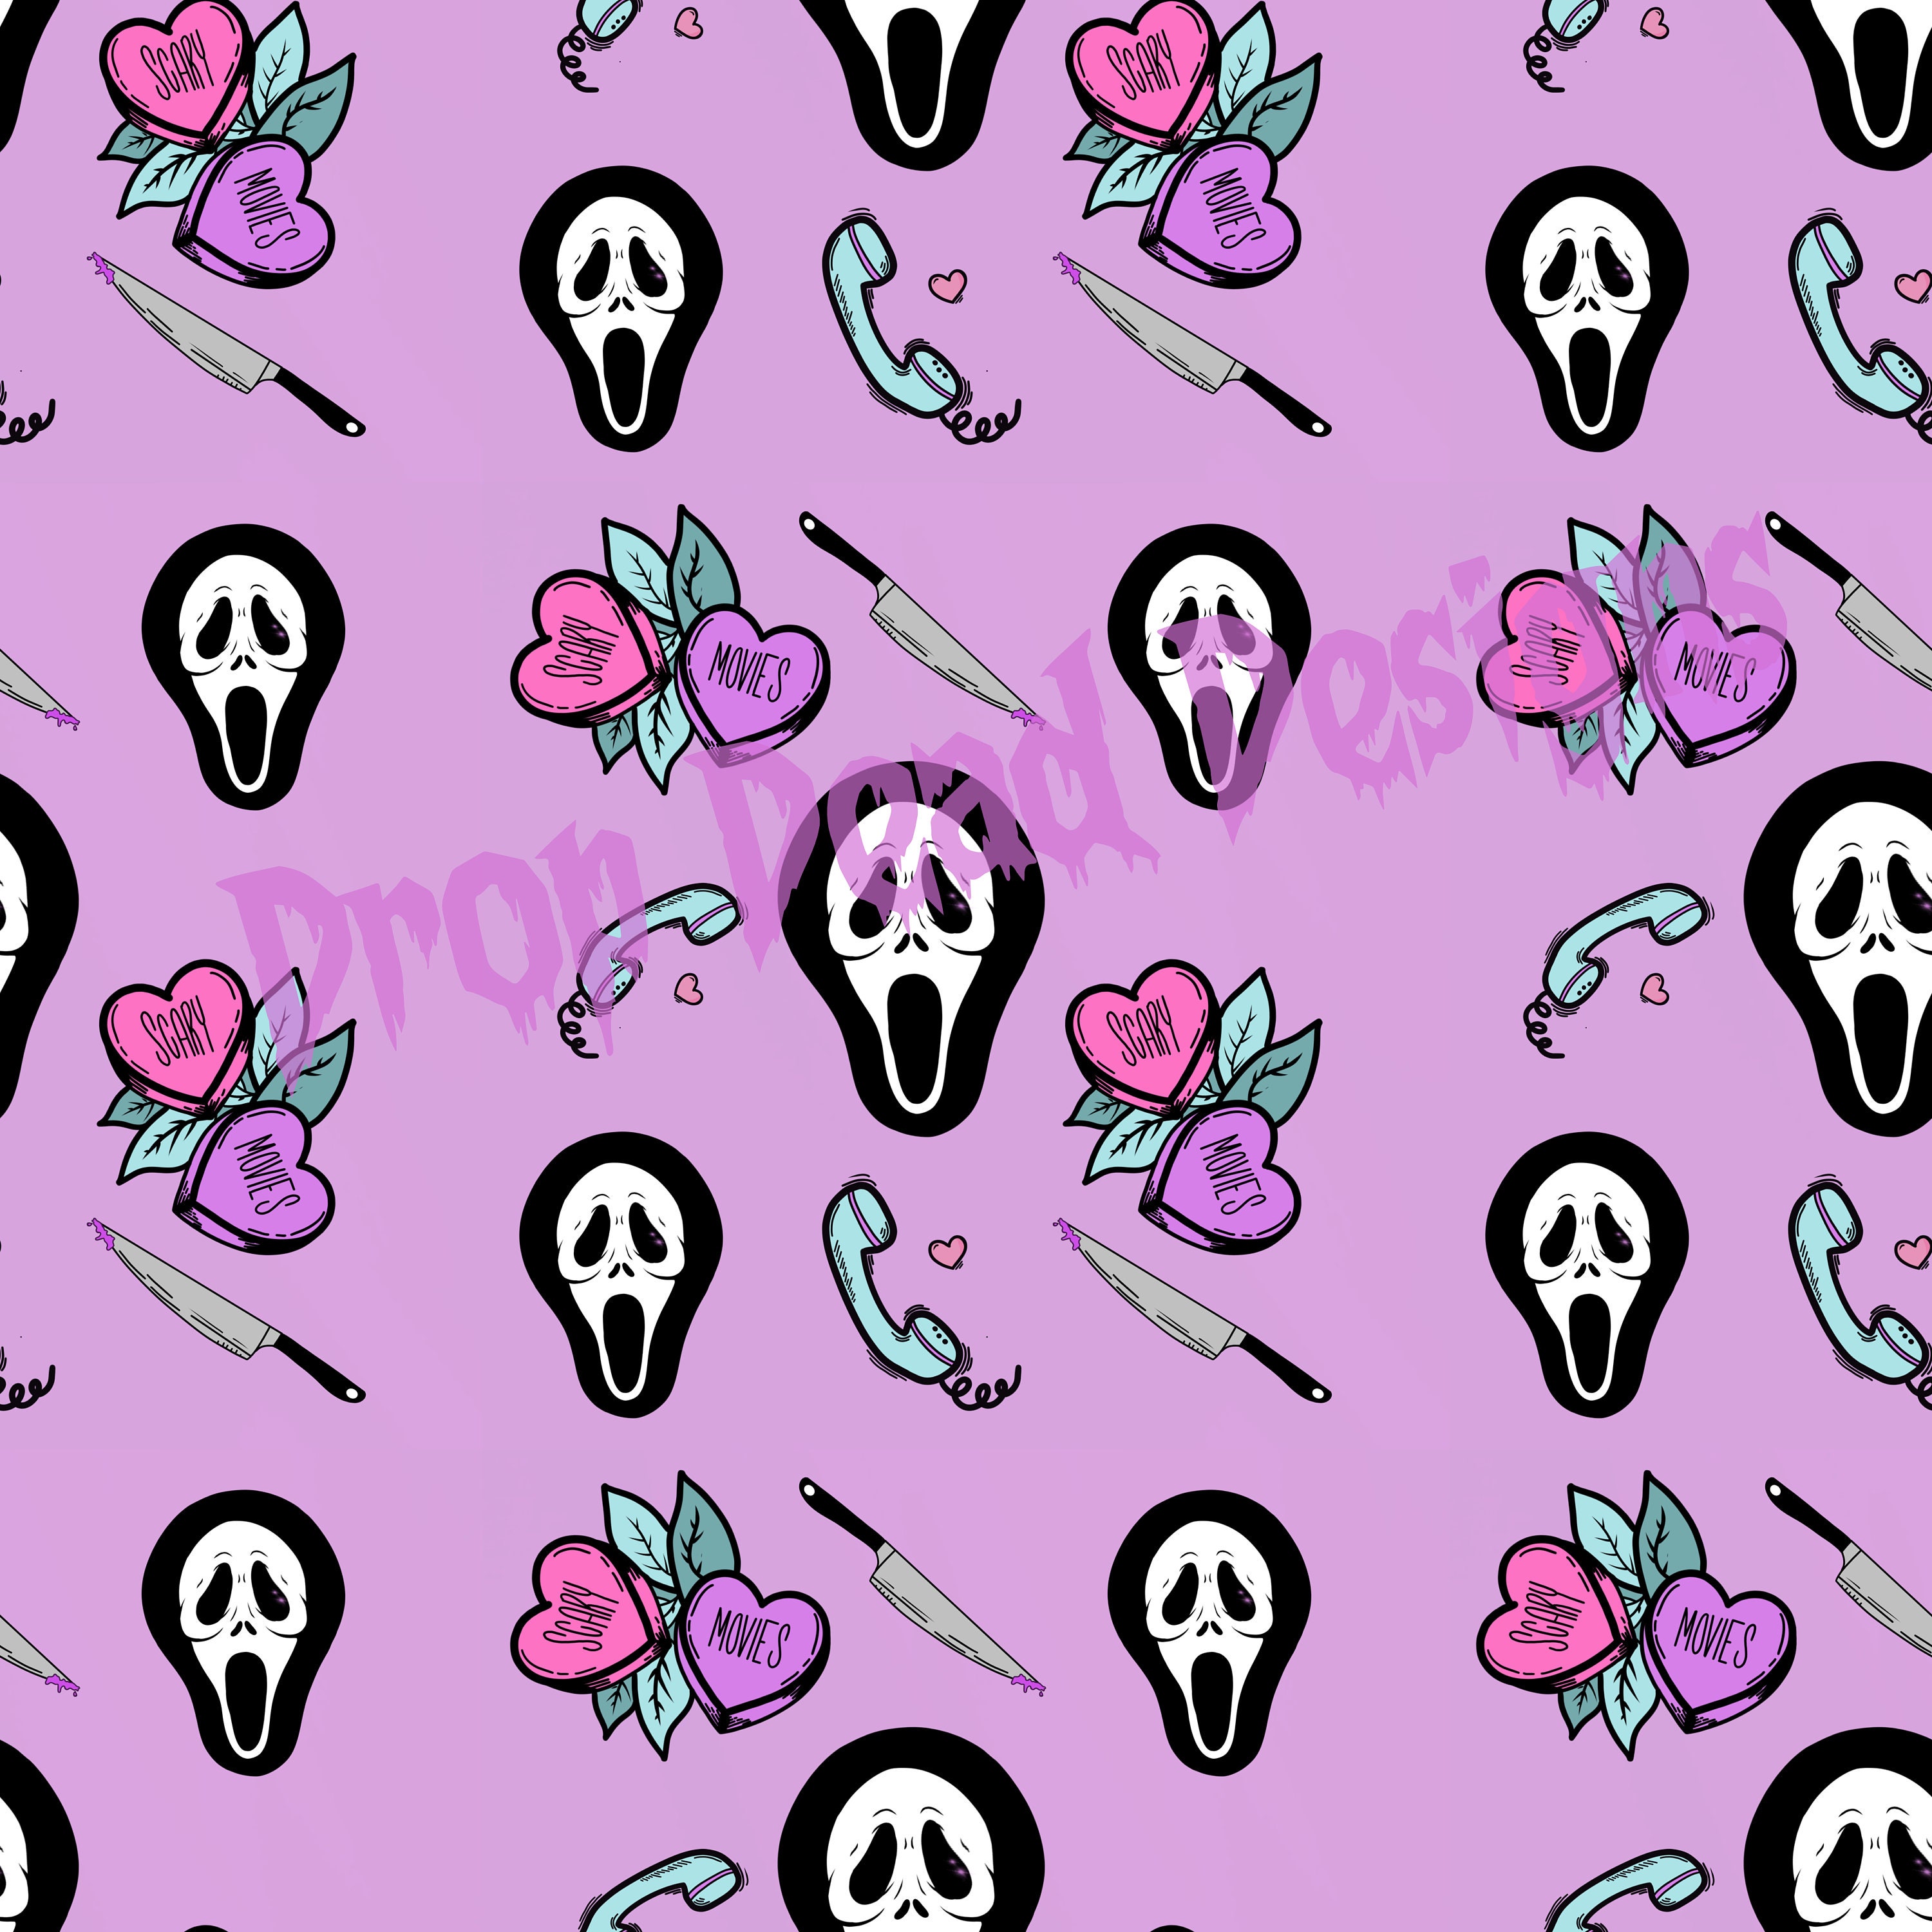 Buy NOT DIGITAL DOWNLOAD Scream Ghost Face No You Hang up Ready to Online  in India  Etsy